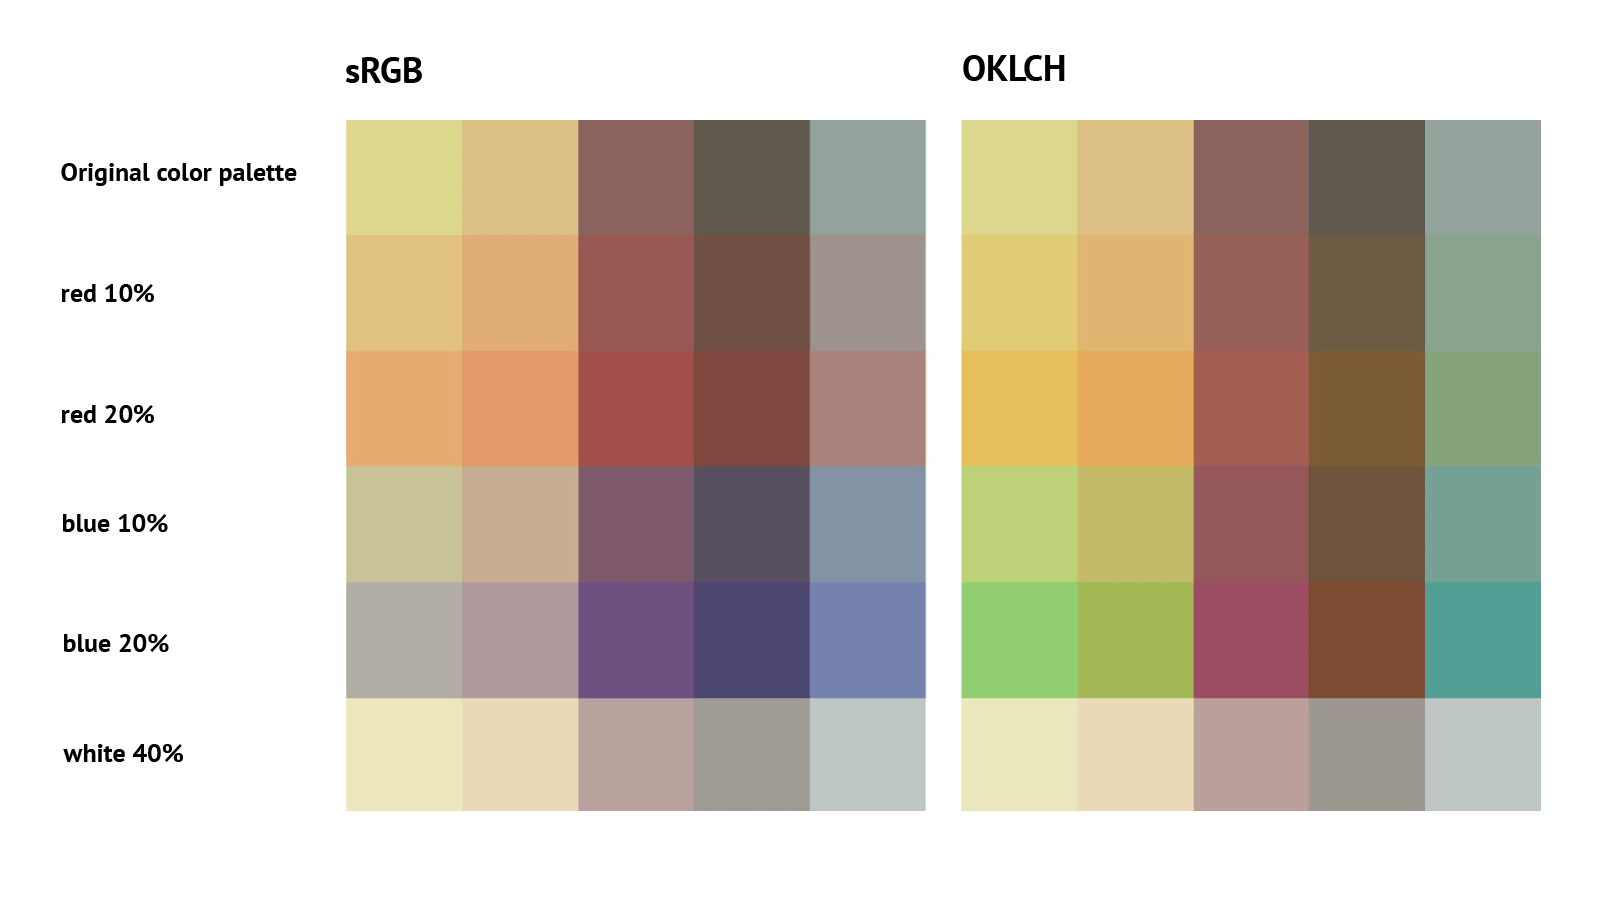 The same color mixes produce different results when we compare sRGB (left) and OKLCH (right) color spaces